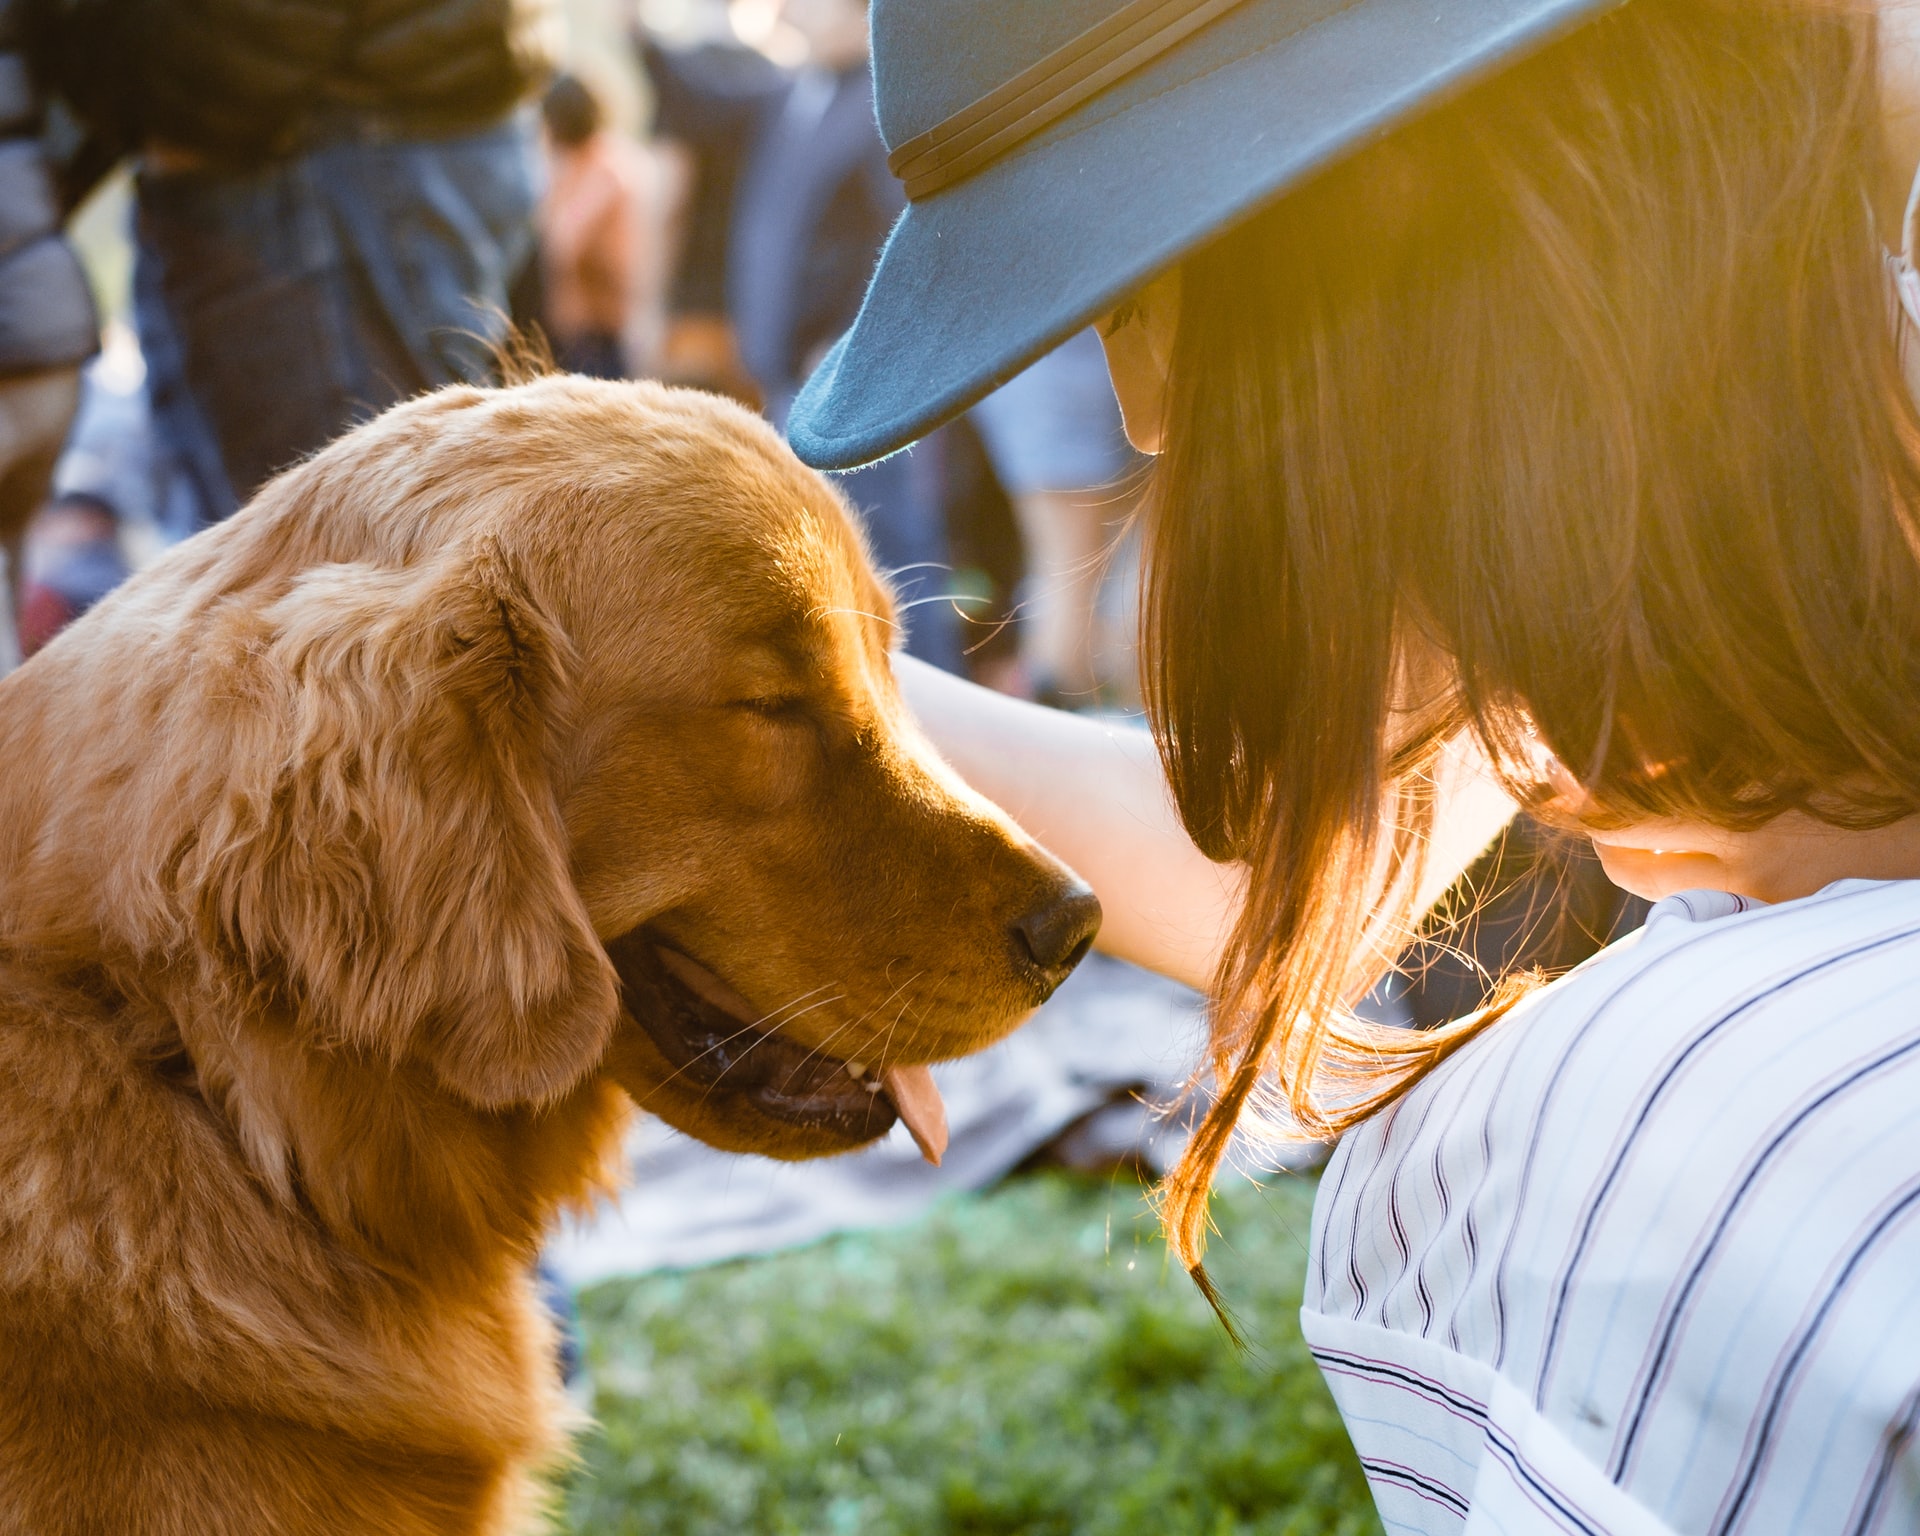 8 Ways to Prepare Saying Goodbye to a Pet